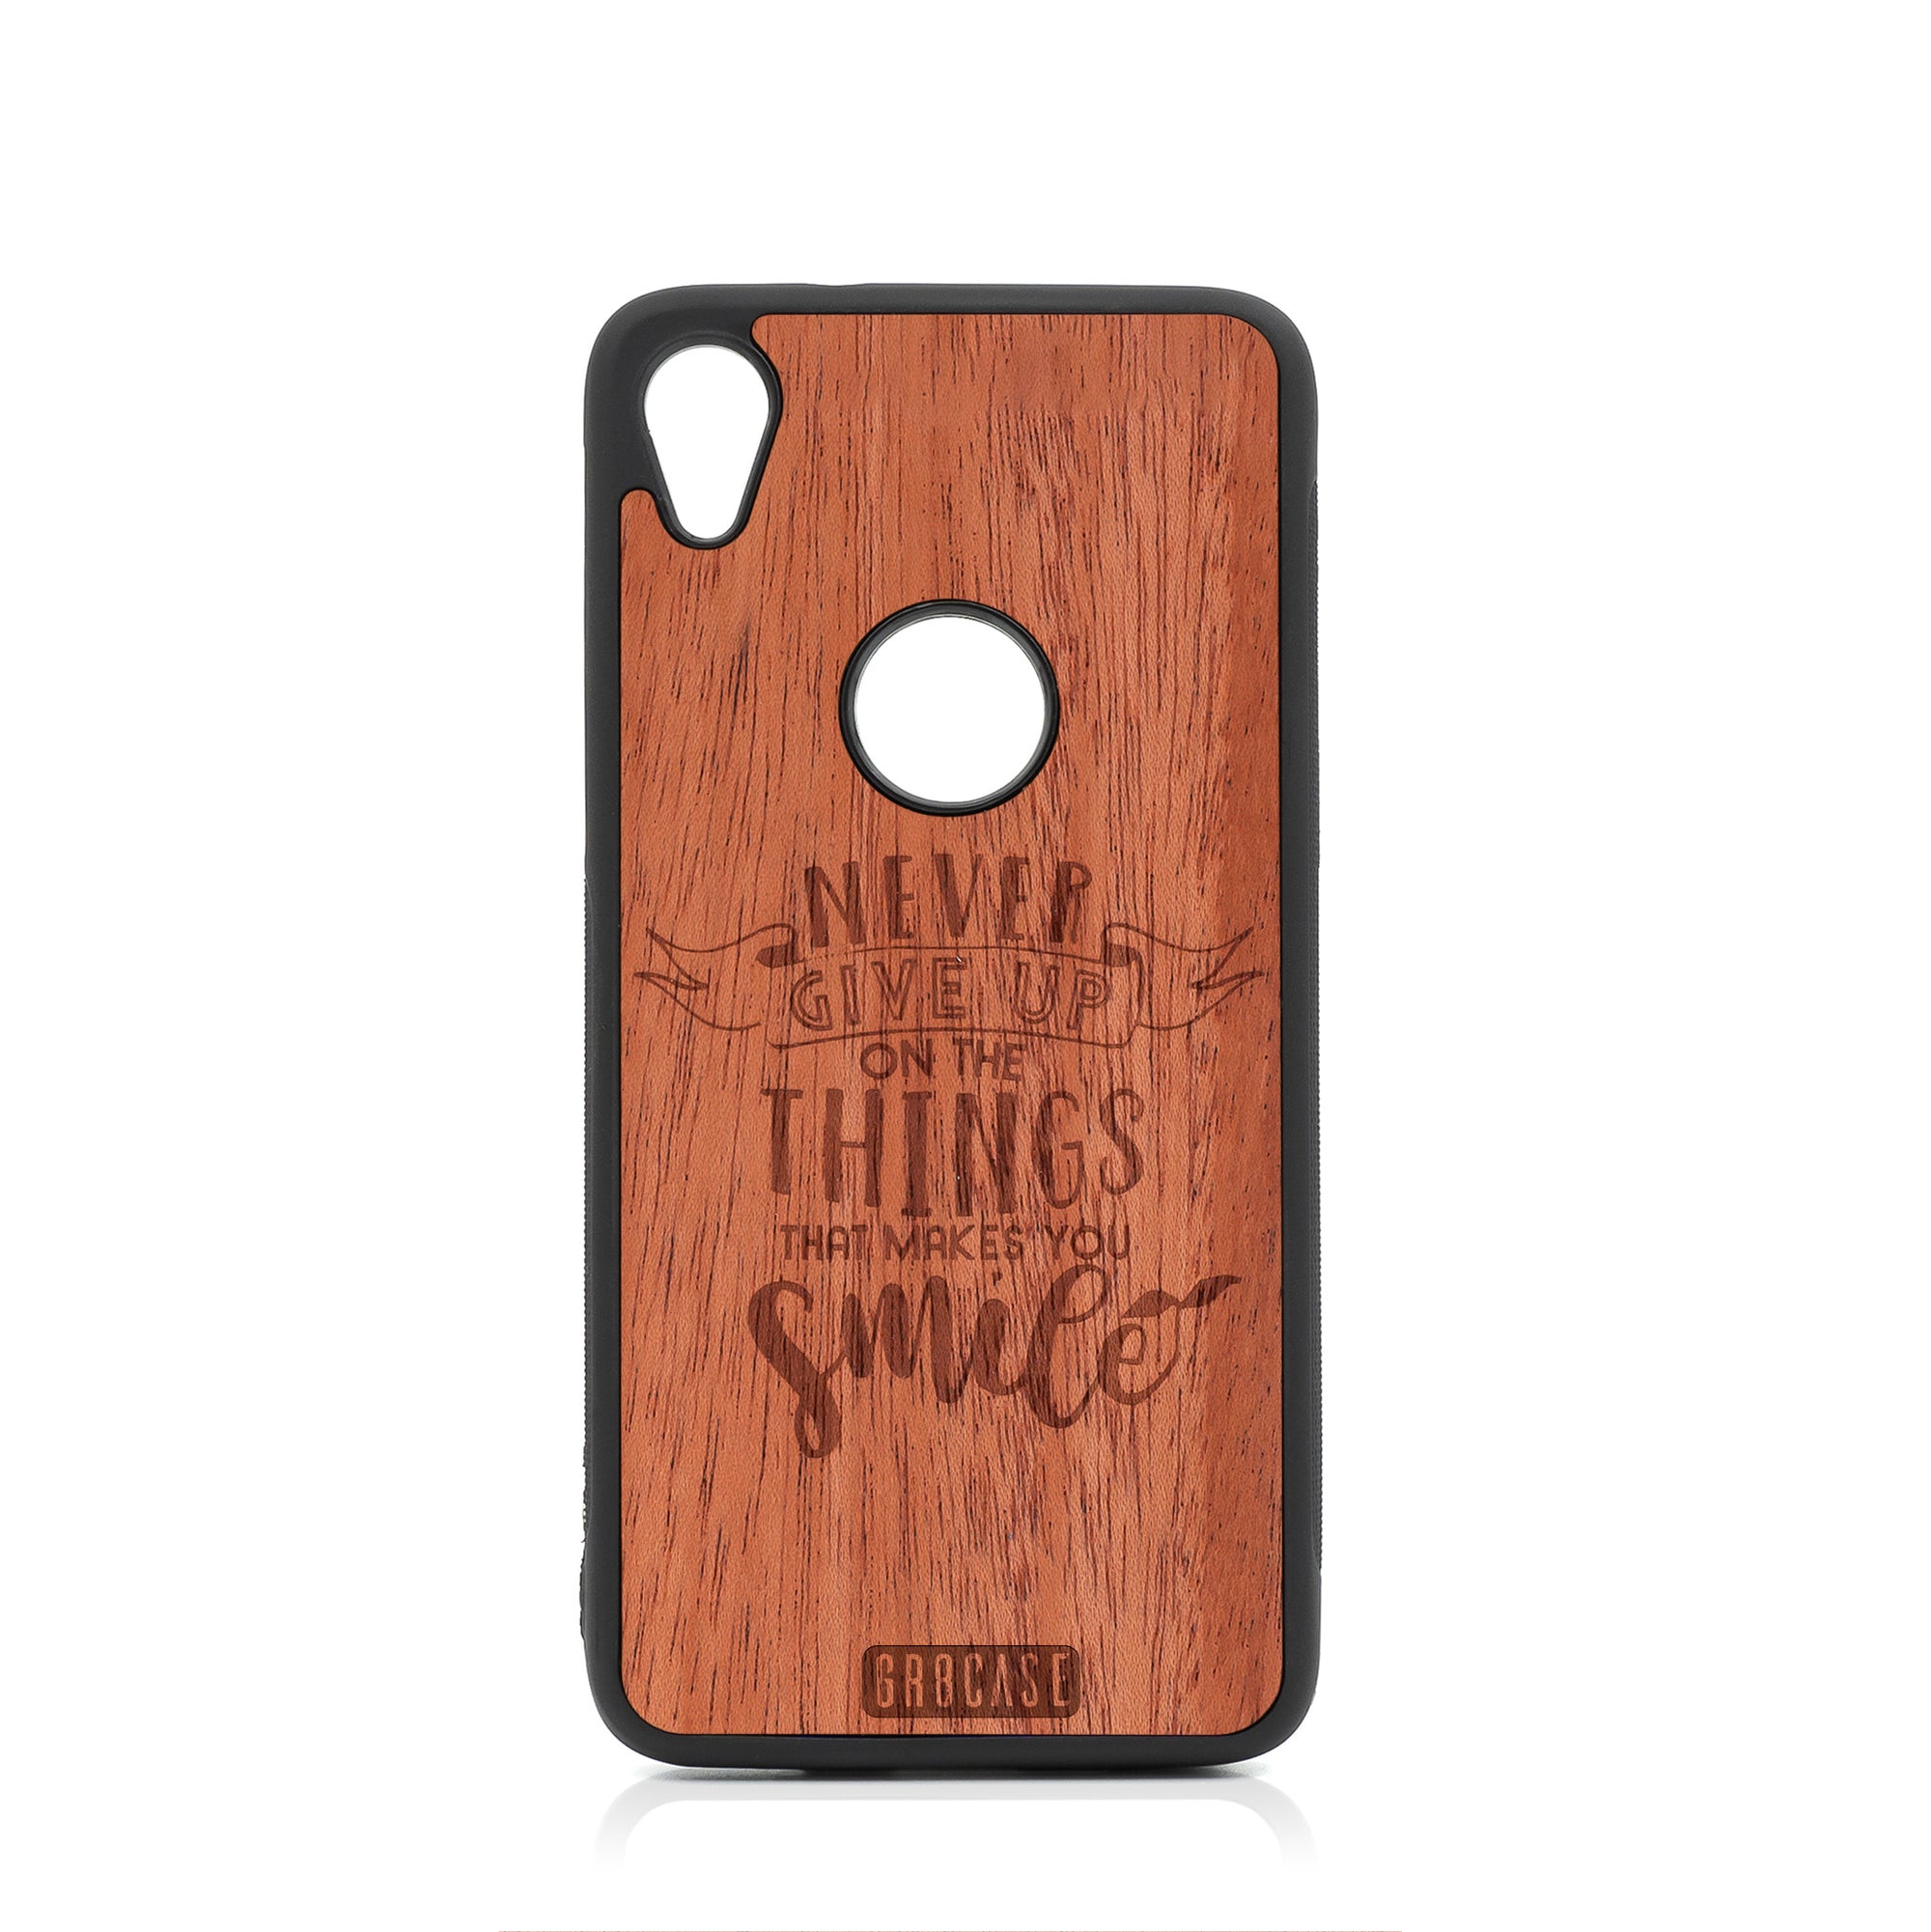 Never Give Up On The Things That Makes You Smile Design Wood Case For Moto E6 by GR8CASE